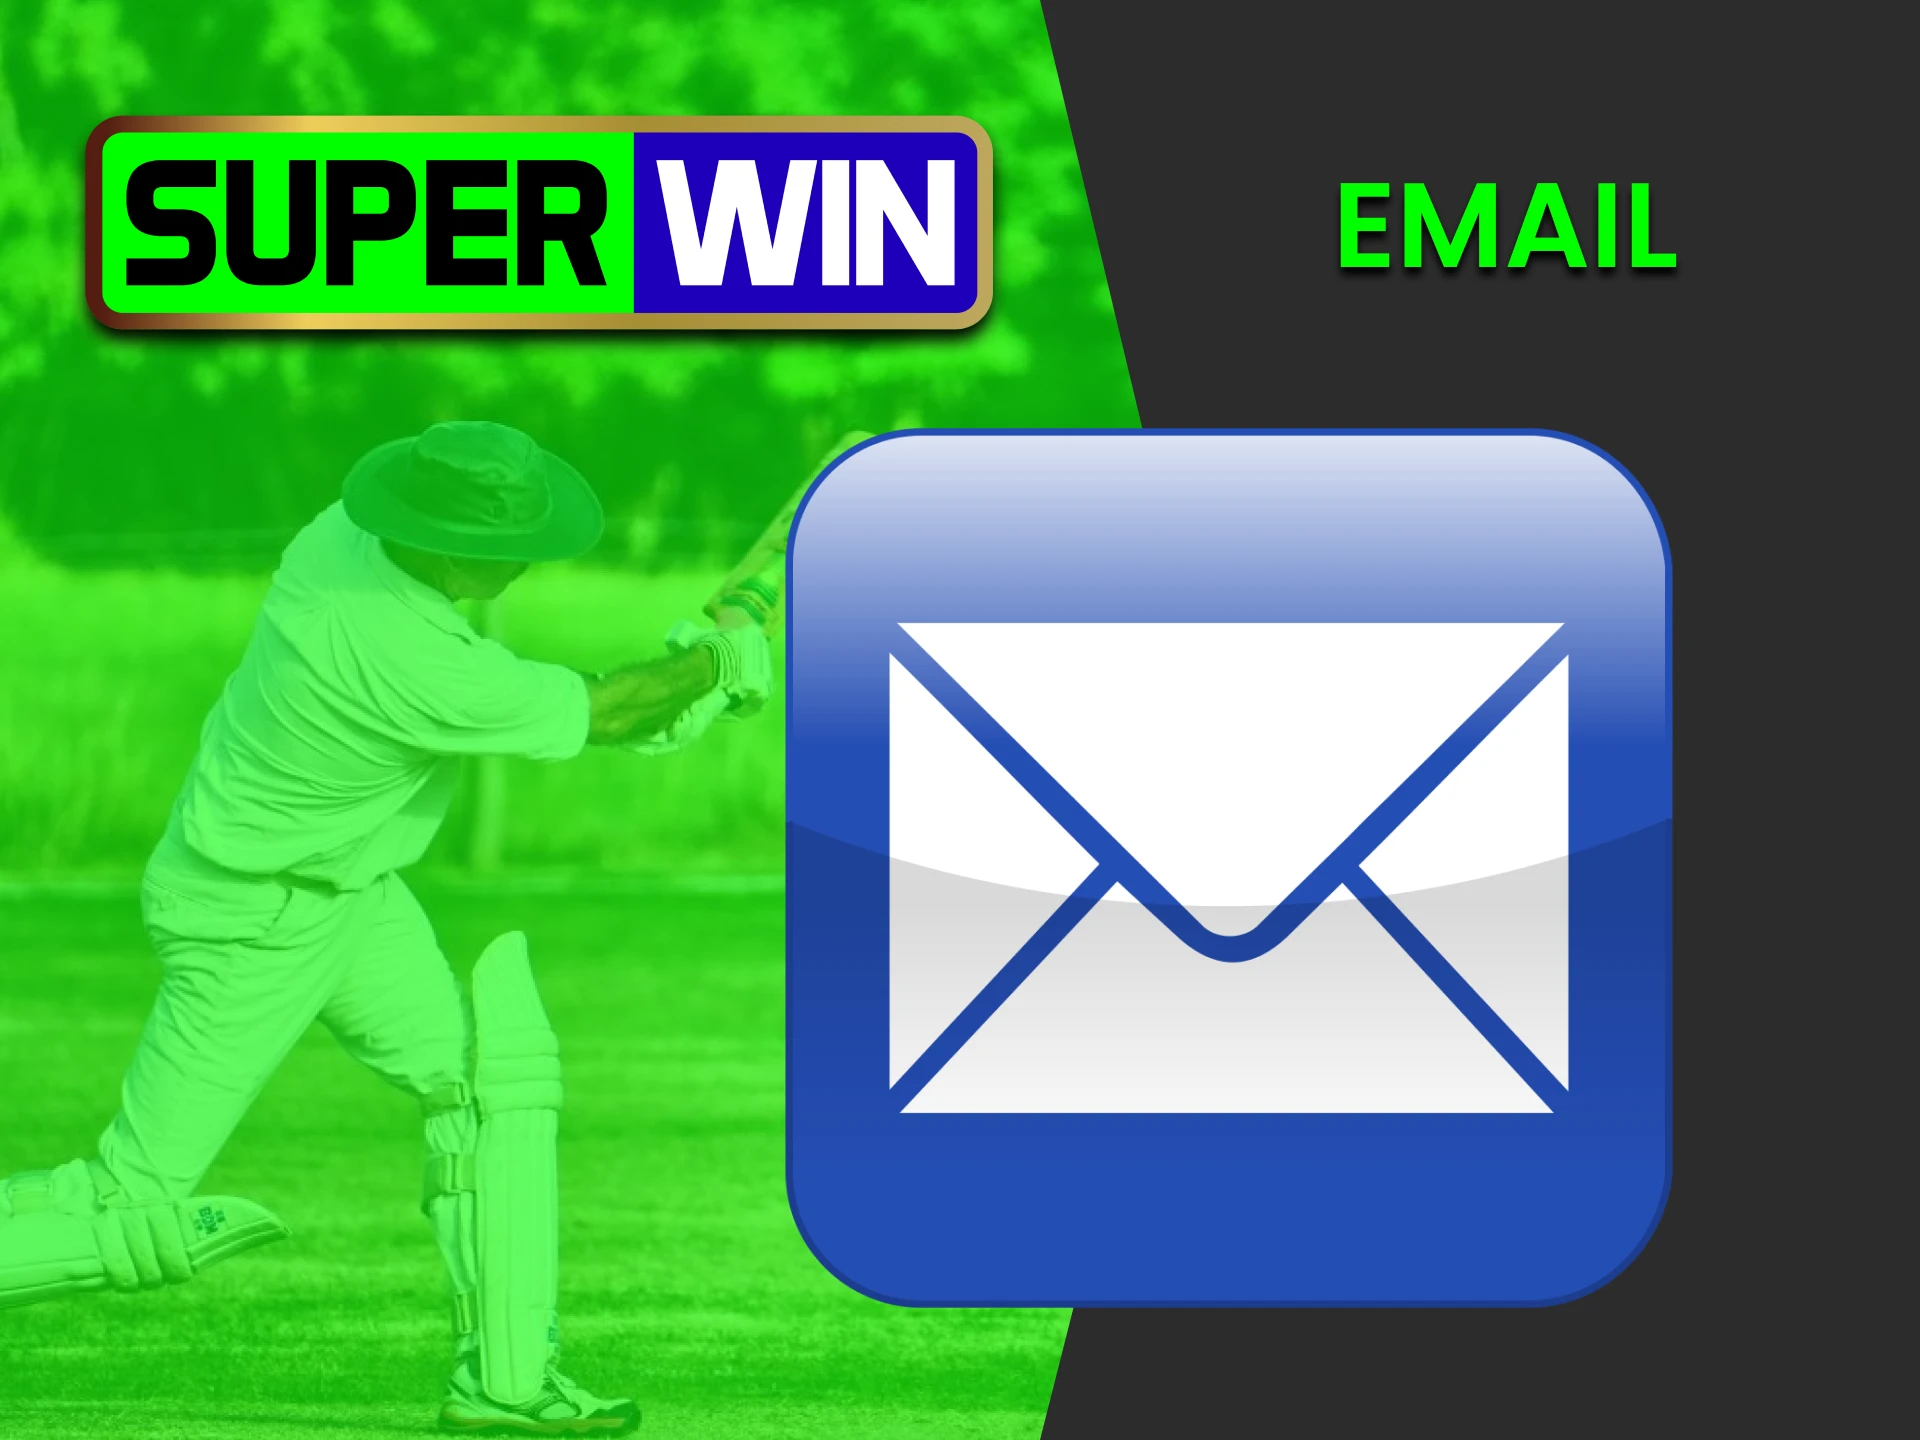 You can contact the Superwin team via Email.